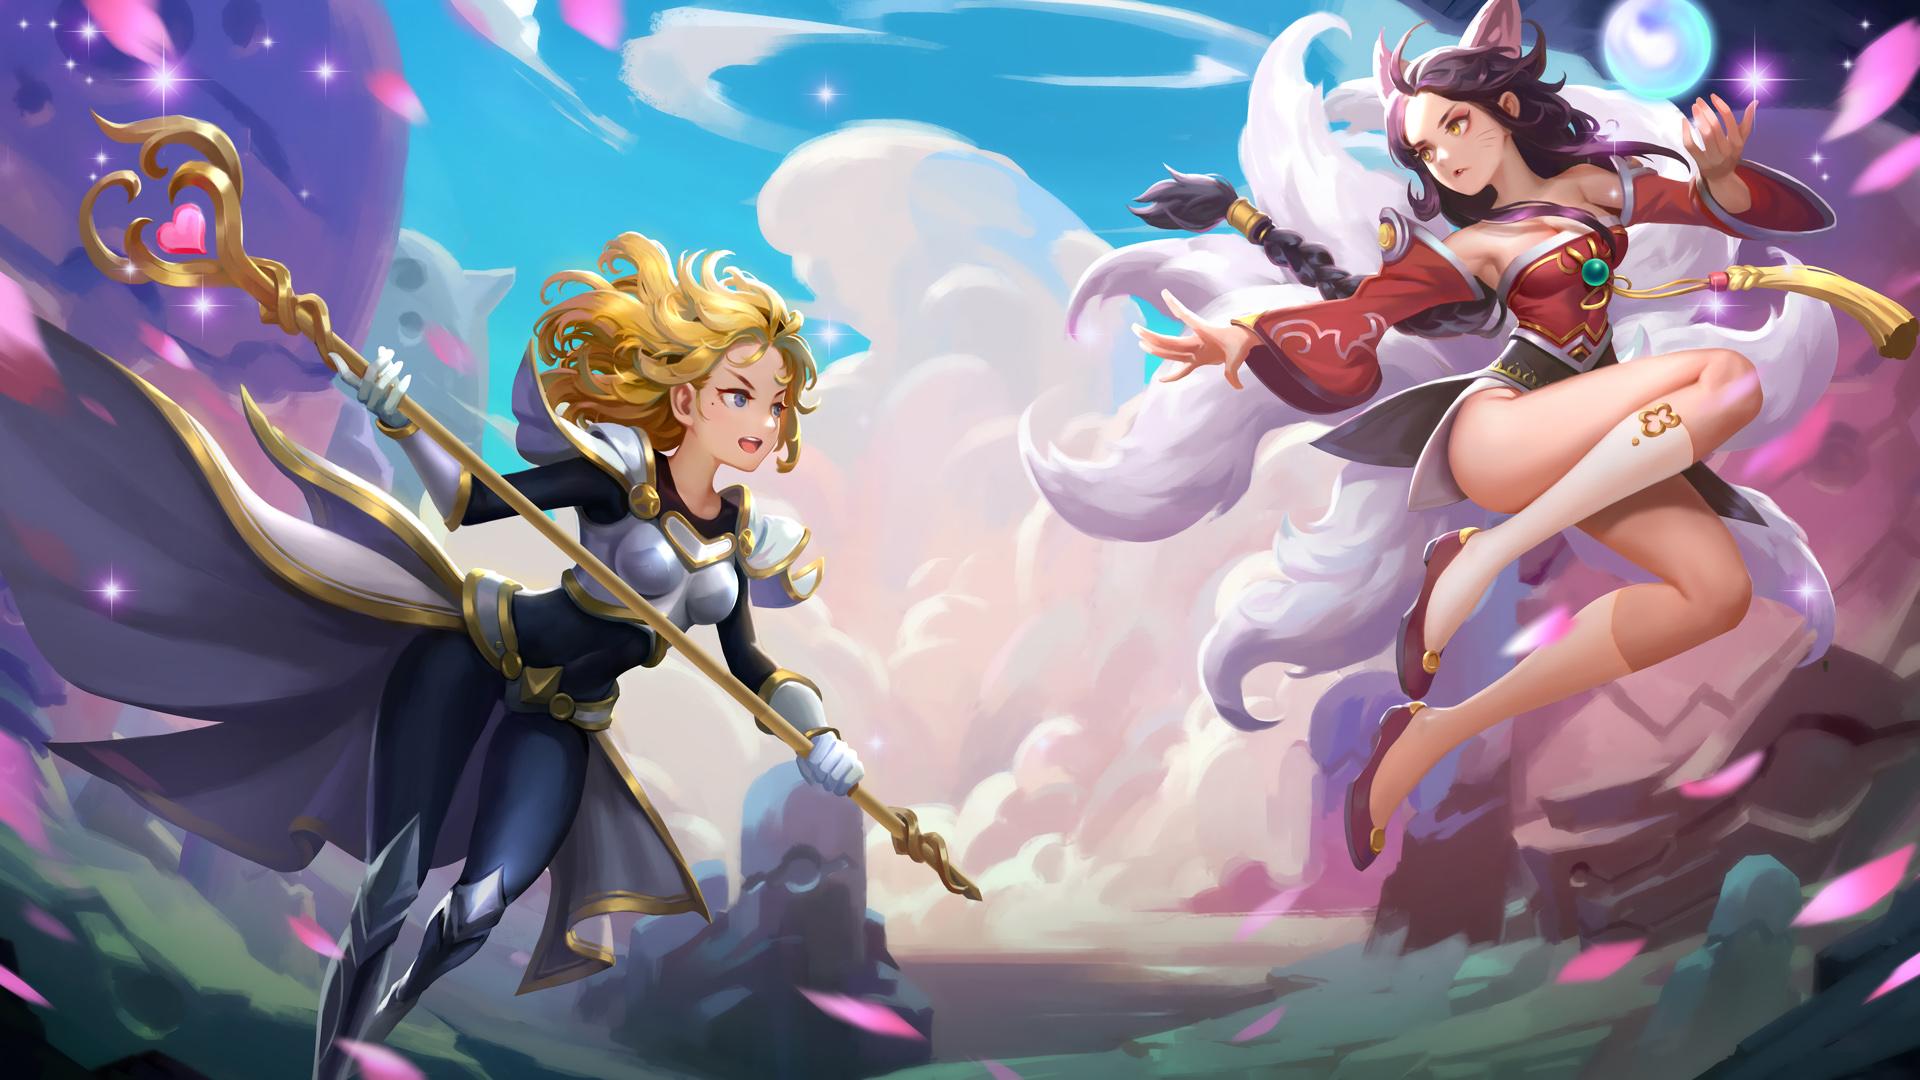 Wallpaper girl staff knight Lux League Of Legends images for desktop  section игры  download